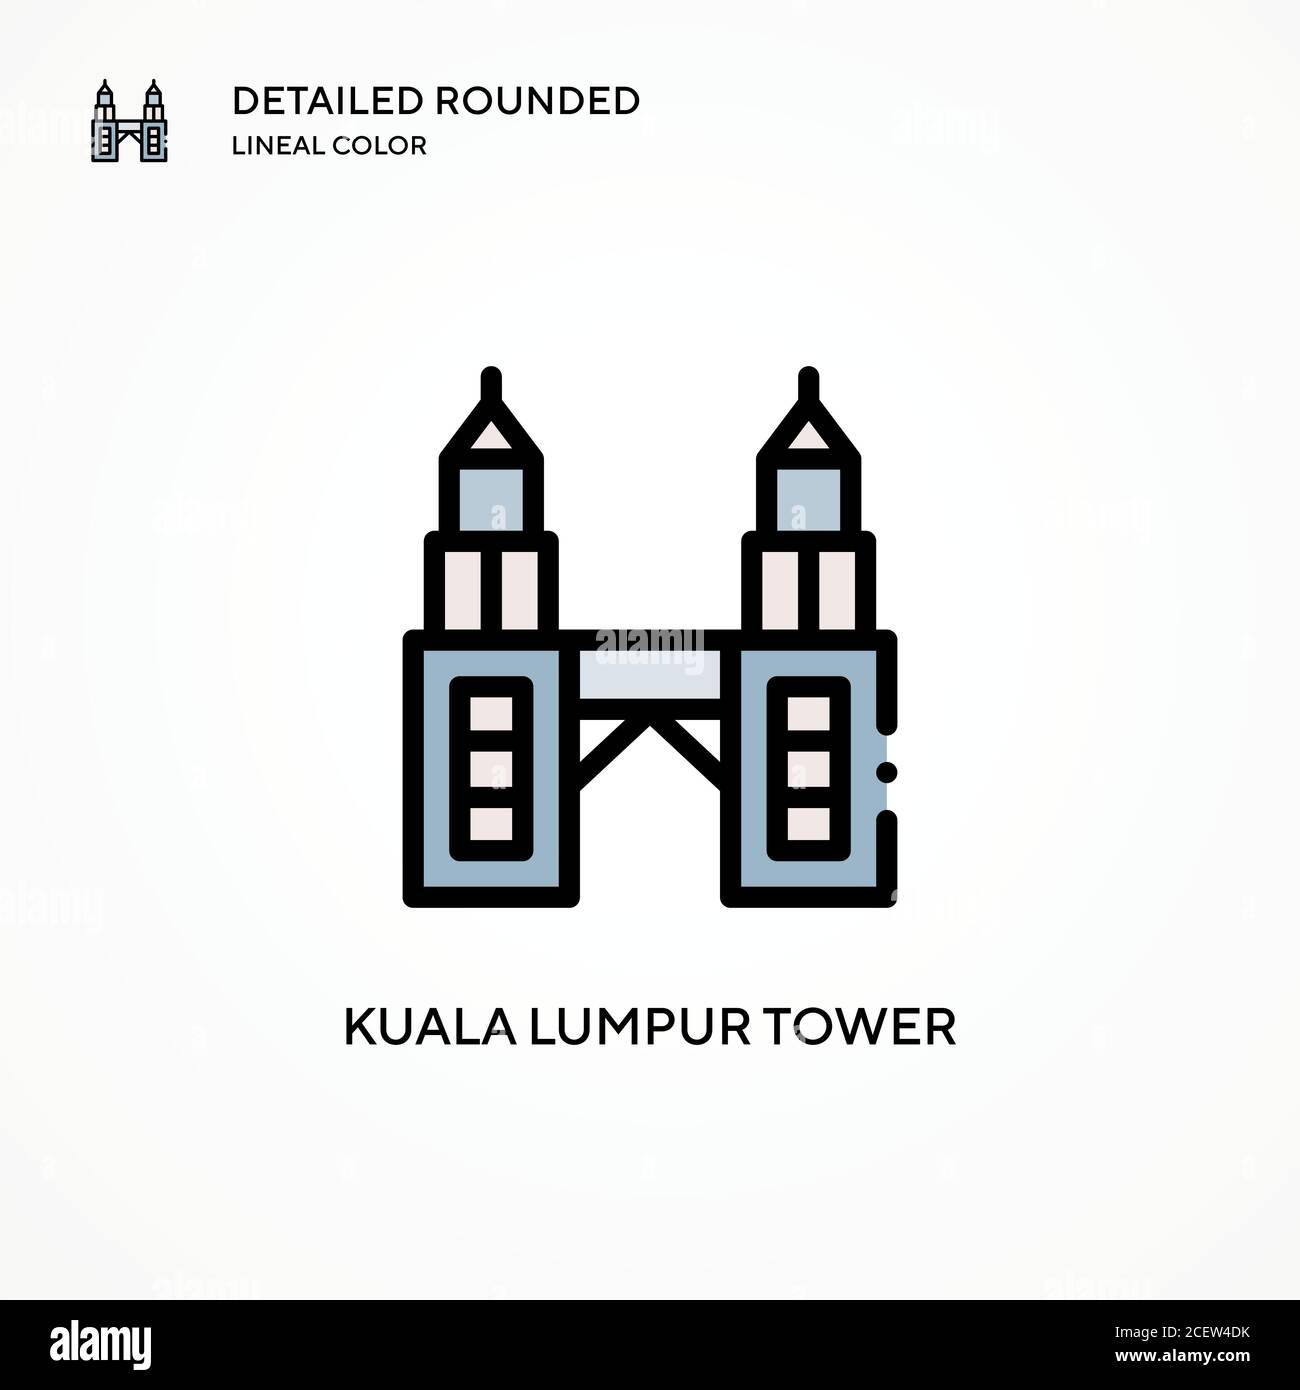 Kuala lumpur tower vector icon. Modern vector illustration concepts. Easy to edit and customize. Stock Vector